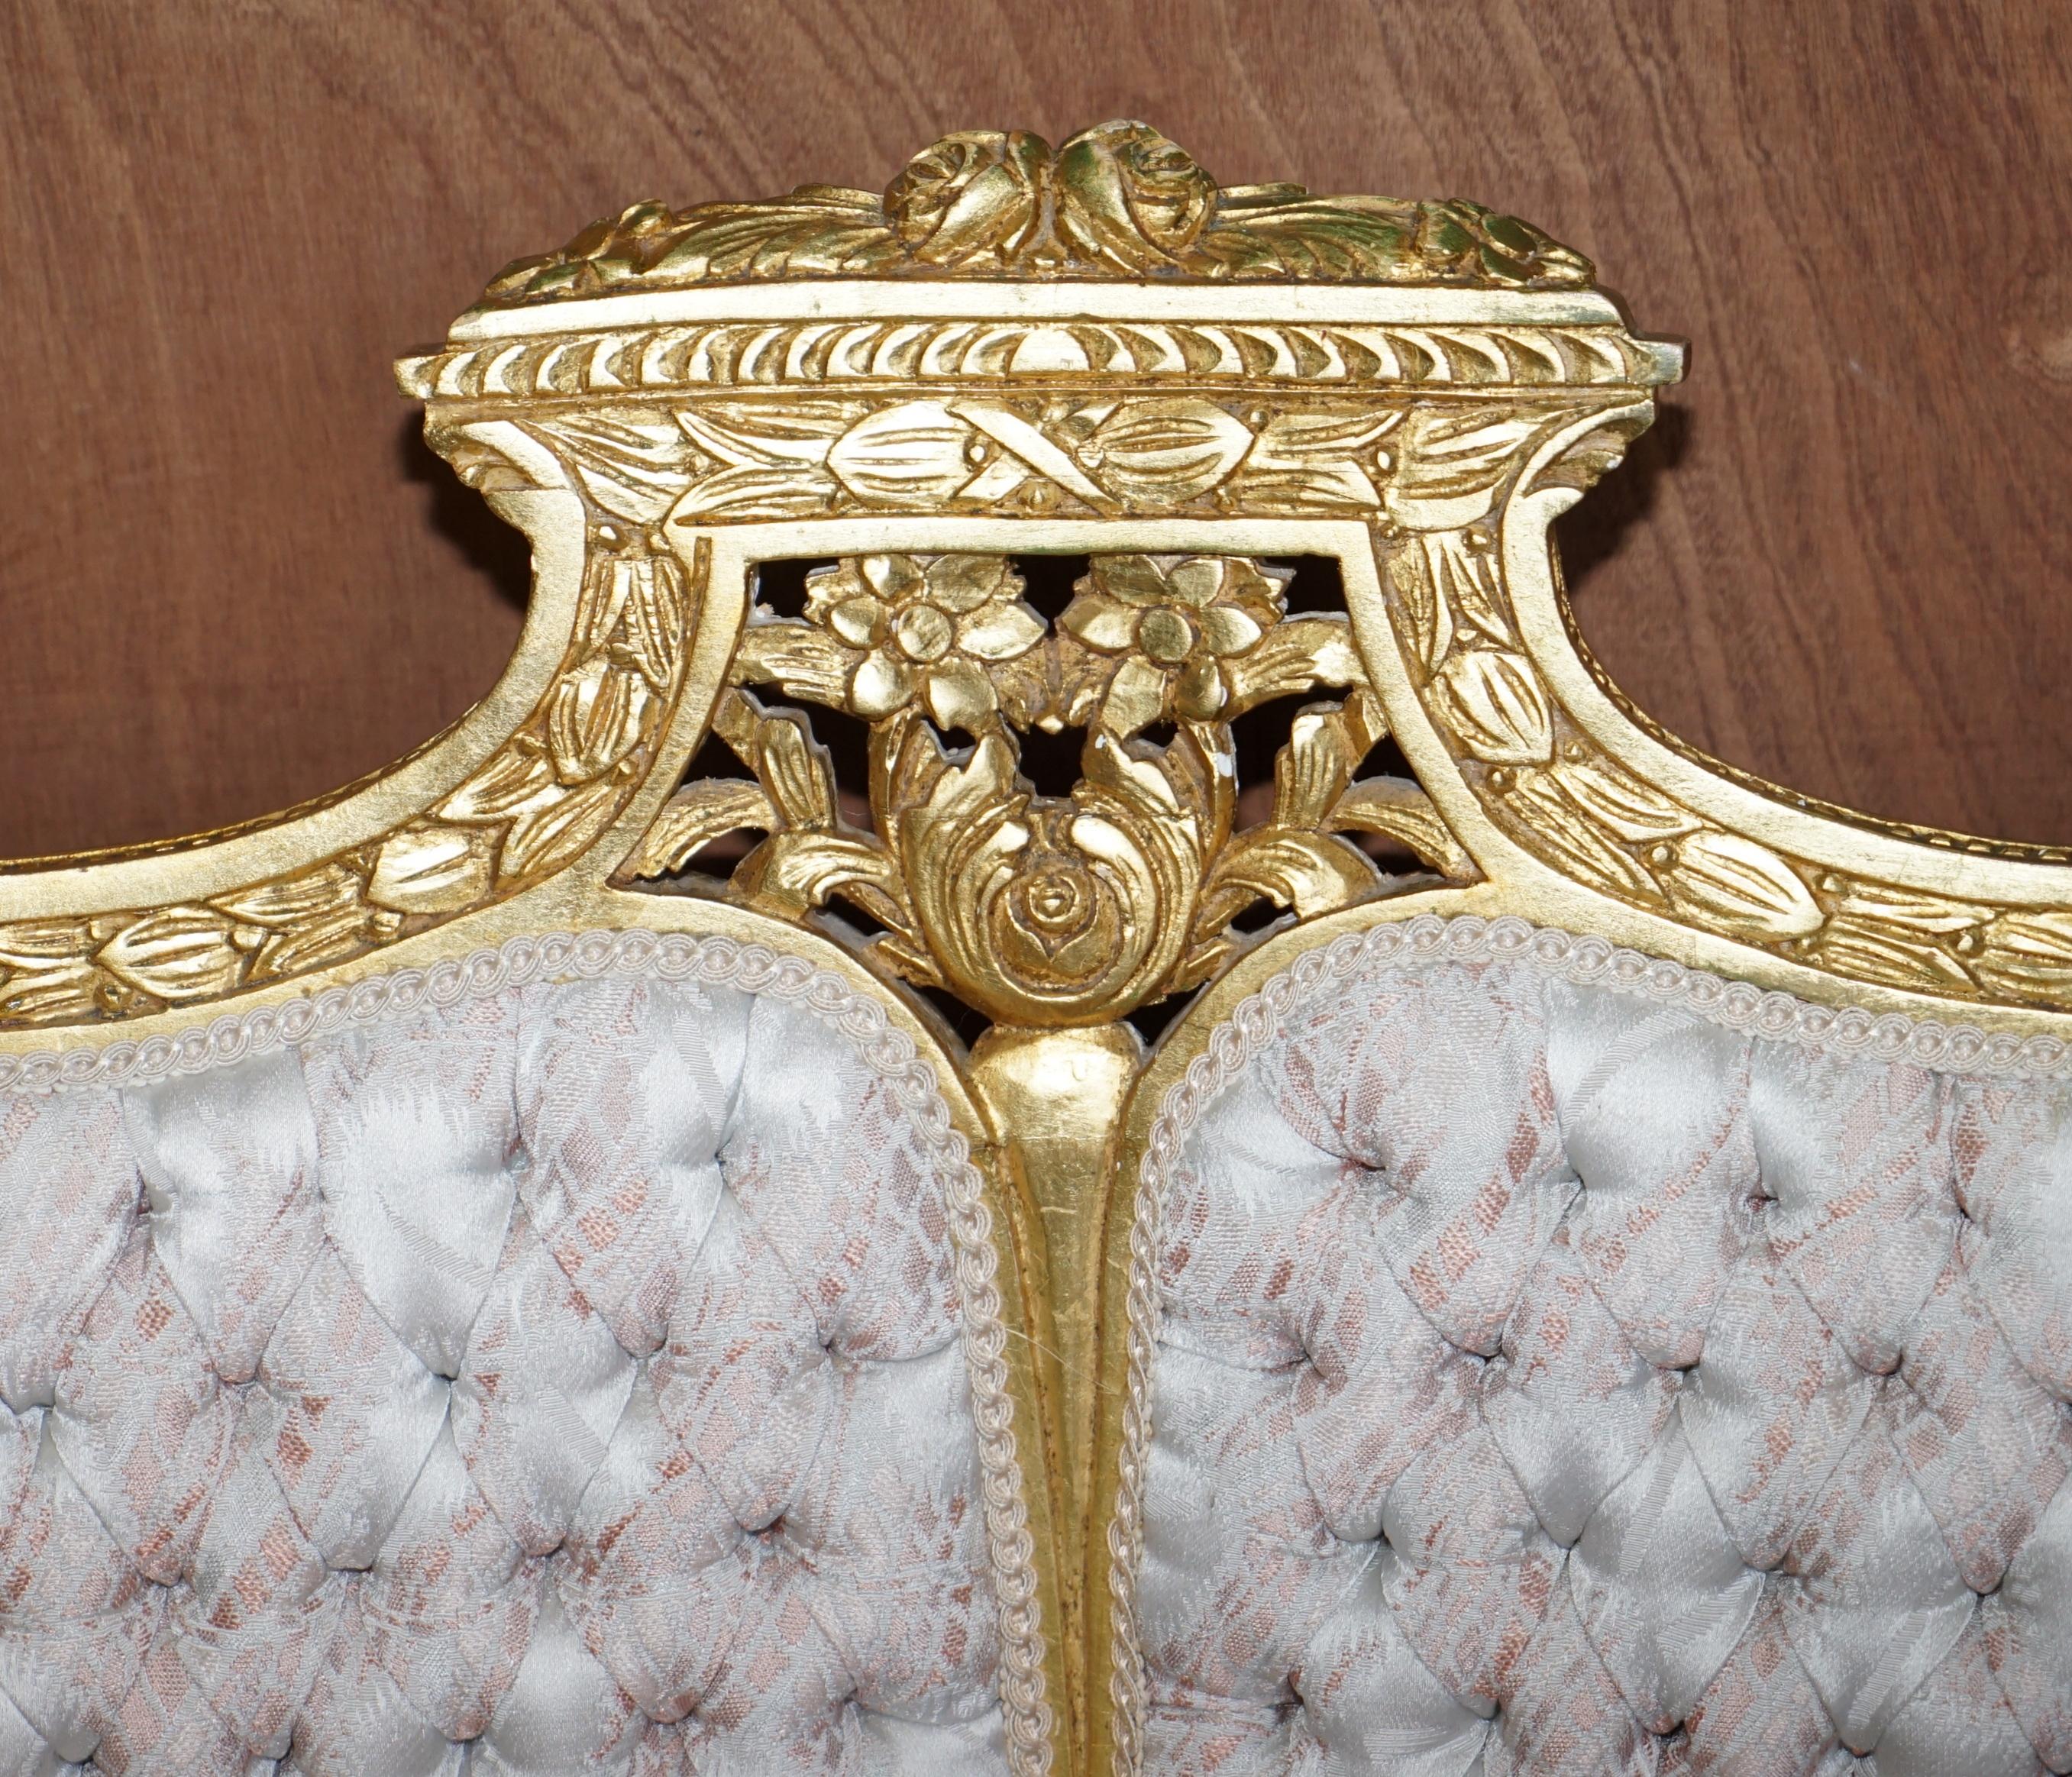 Hand-Crafted Fine Antique Napoleon III circa 1870 Gold Giltwood Bergere Louis XVI Sofa Settee For Sale